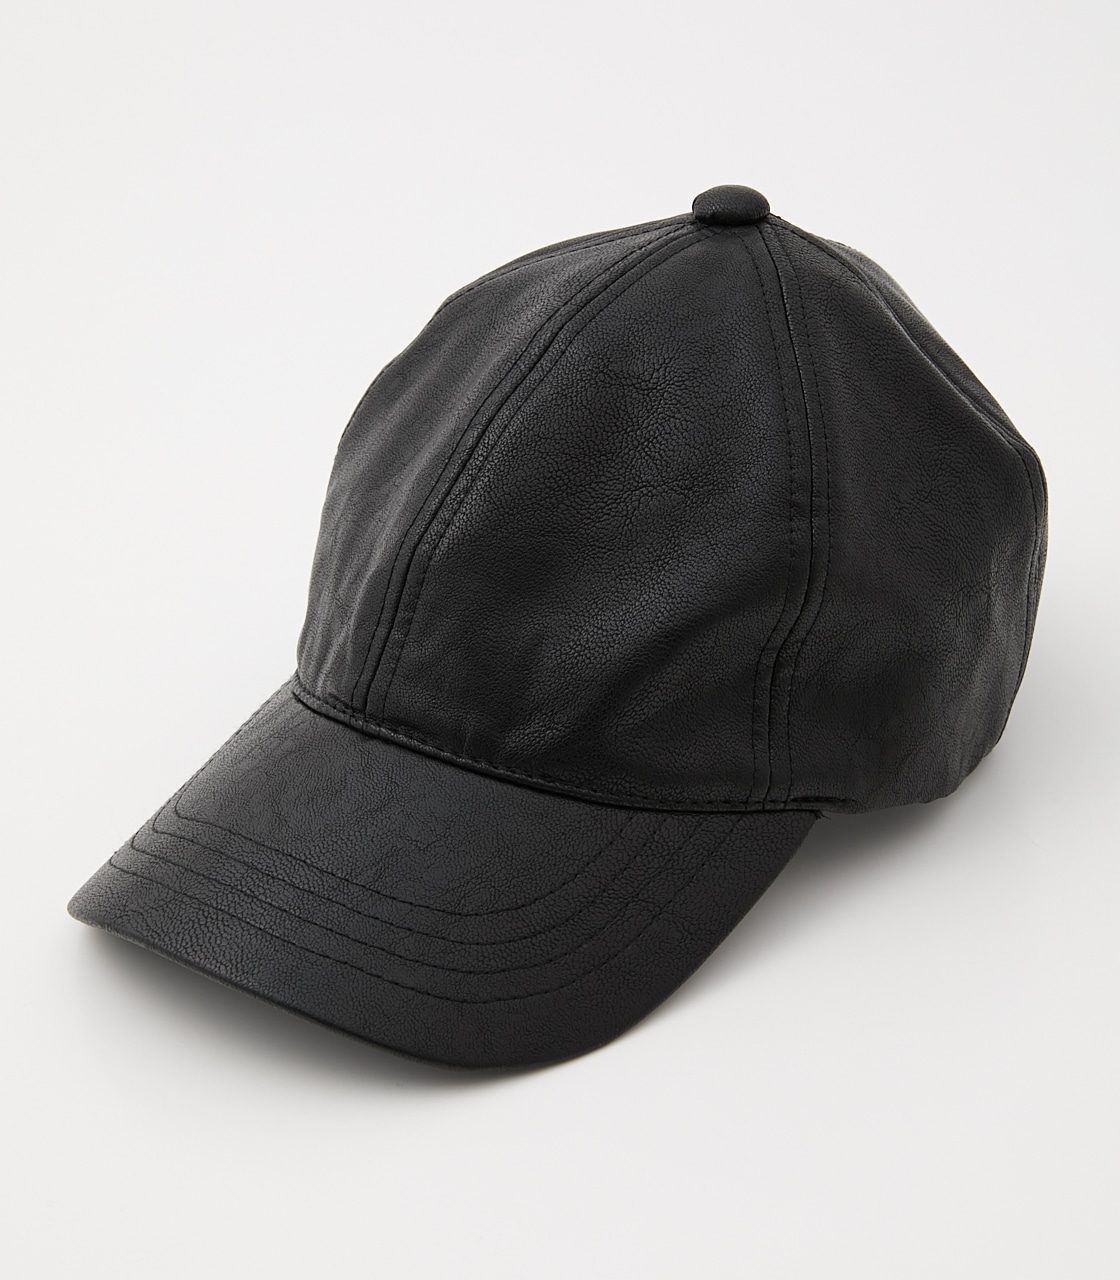 FAUX LEATHER CAP/フェイクレザーキャップ 詳細画像 BLK 1